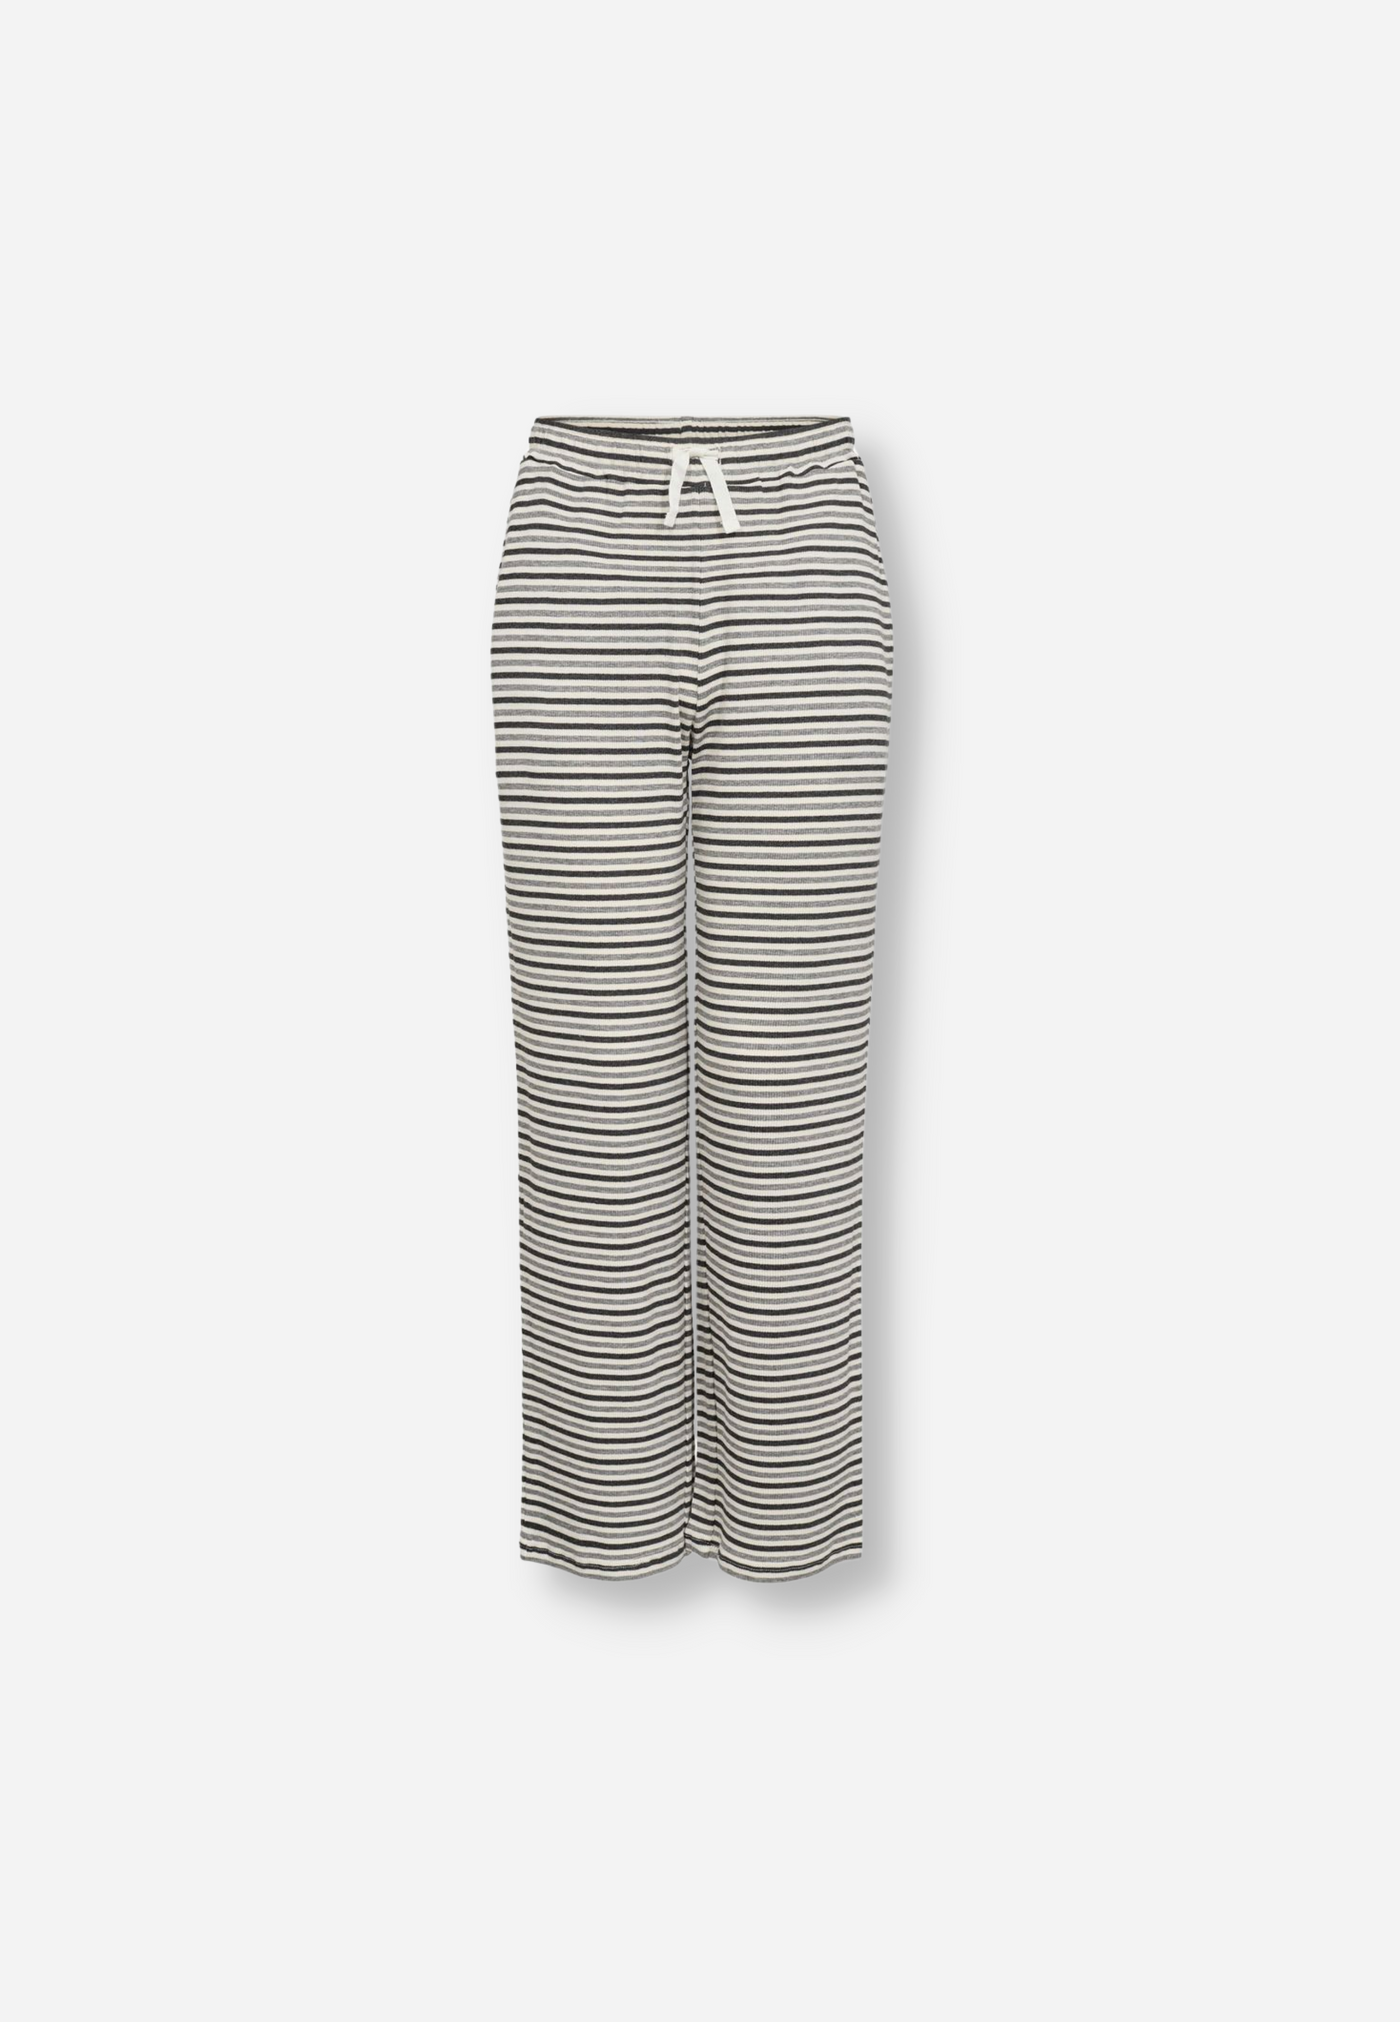 TROUSERS - BLACK STRIPED